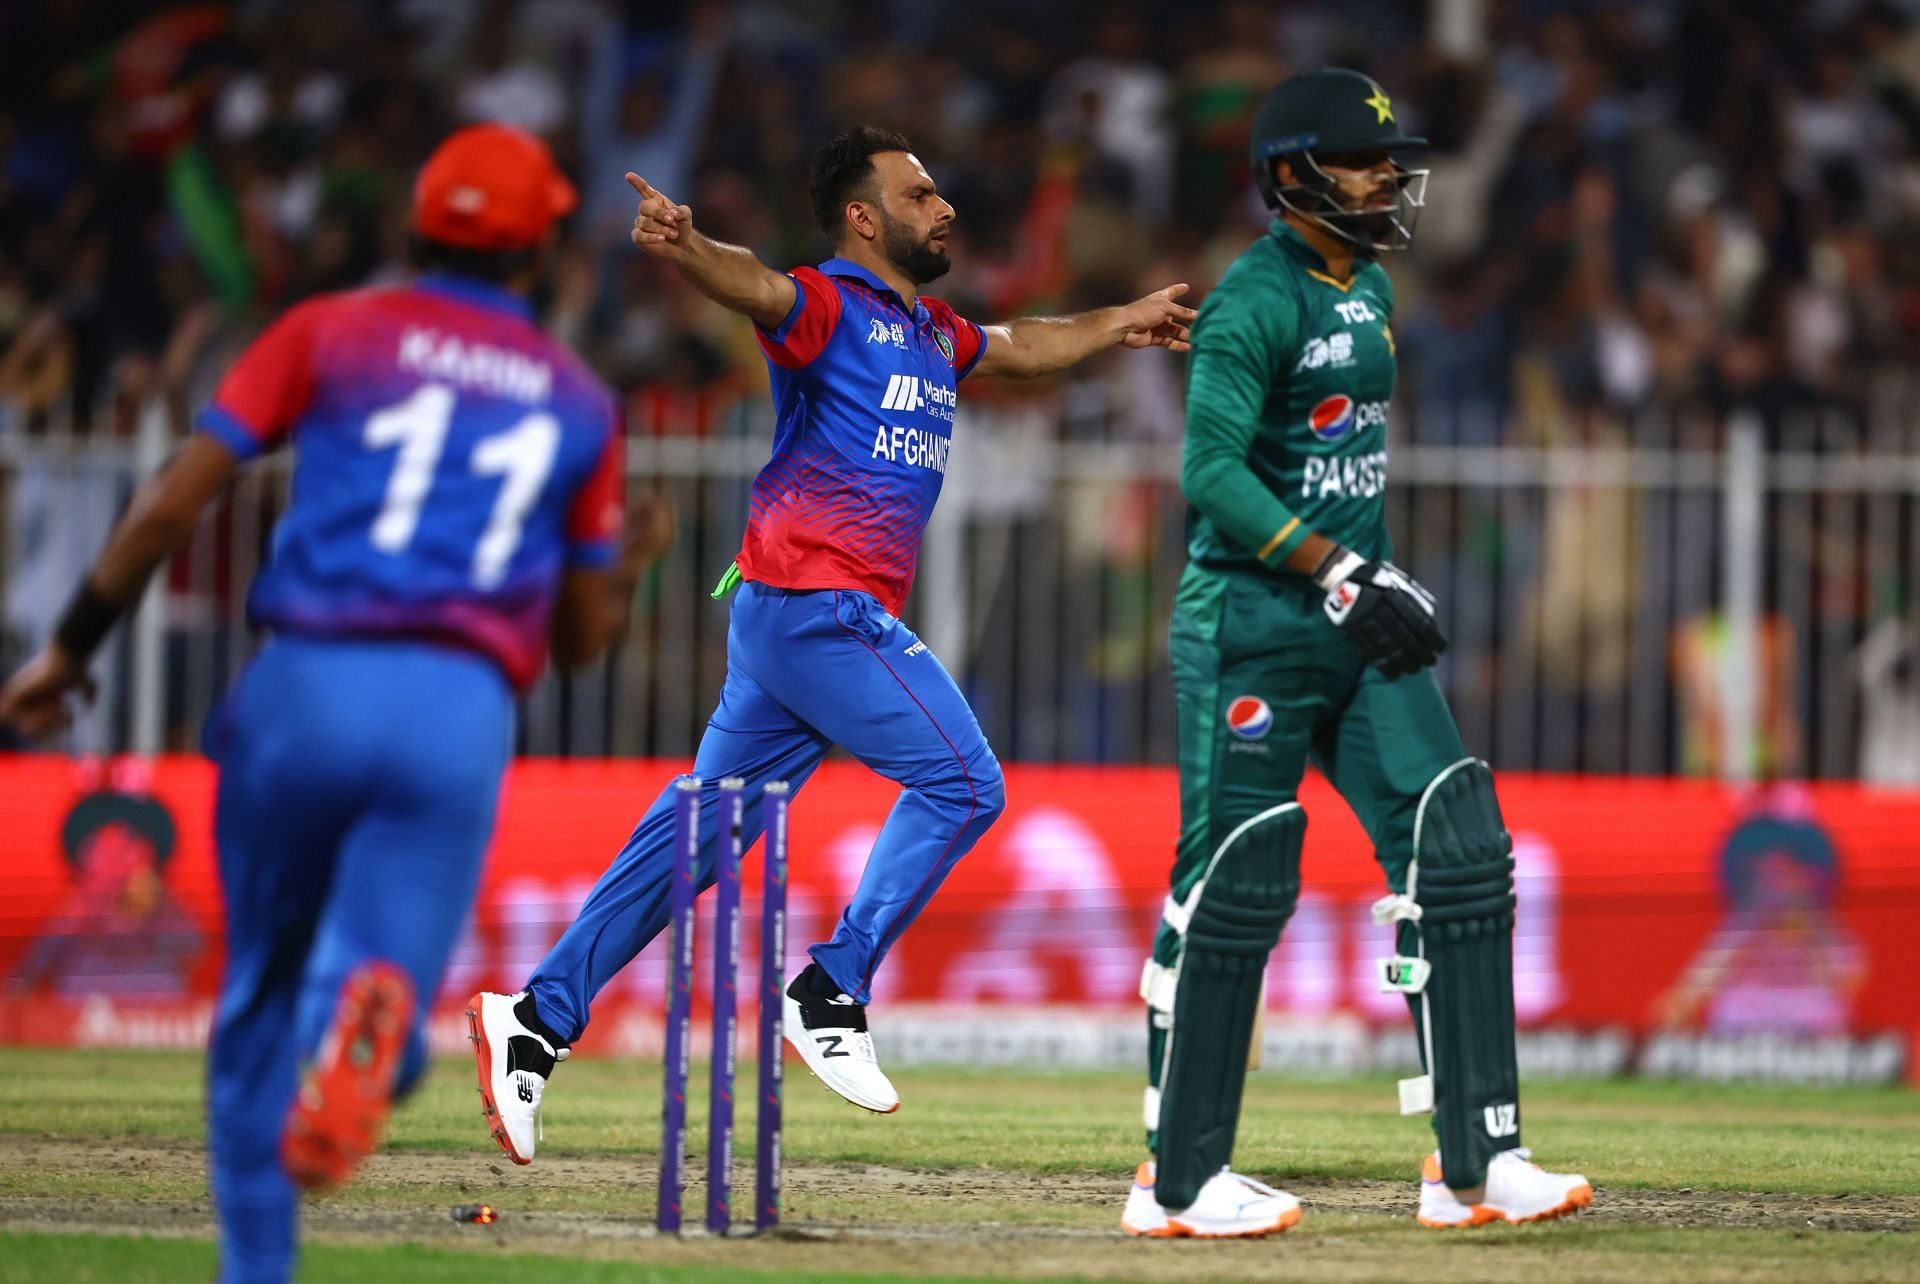 Afghanistan v Pakistan - DP World Asia Cup